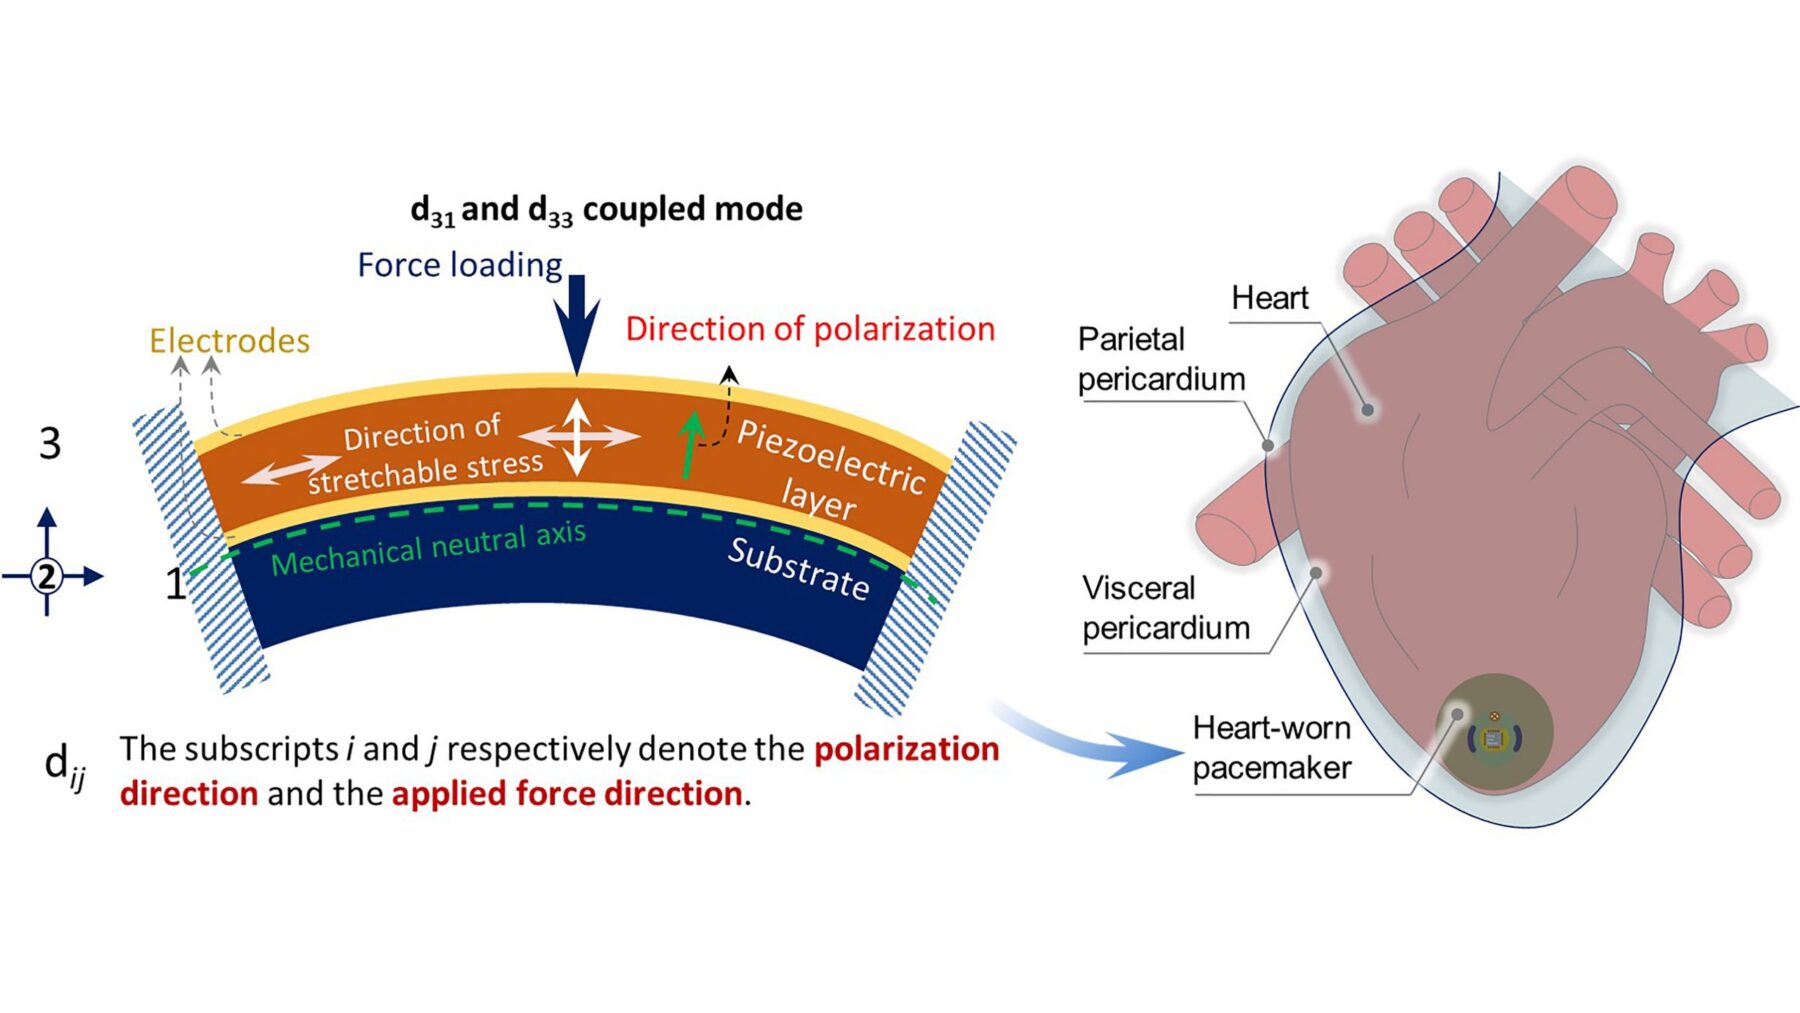 The cardiac pacemaker of the future could be powered by the heart itself, according to researchers at Shanghai Jiao Tong University.

CREDIT: Yi Zhiran